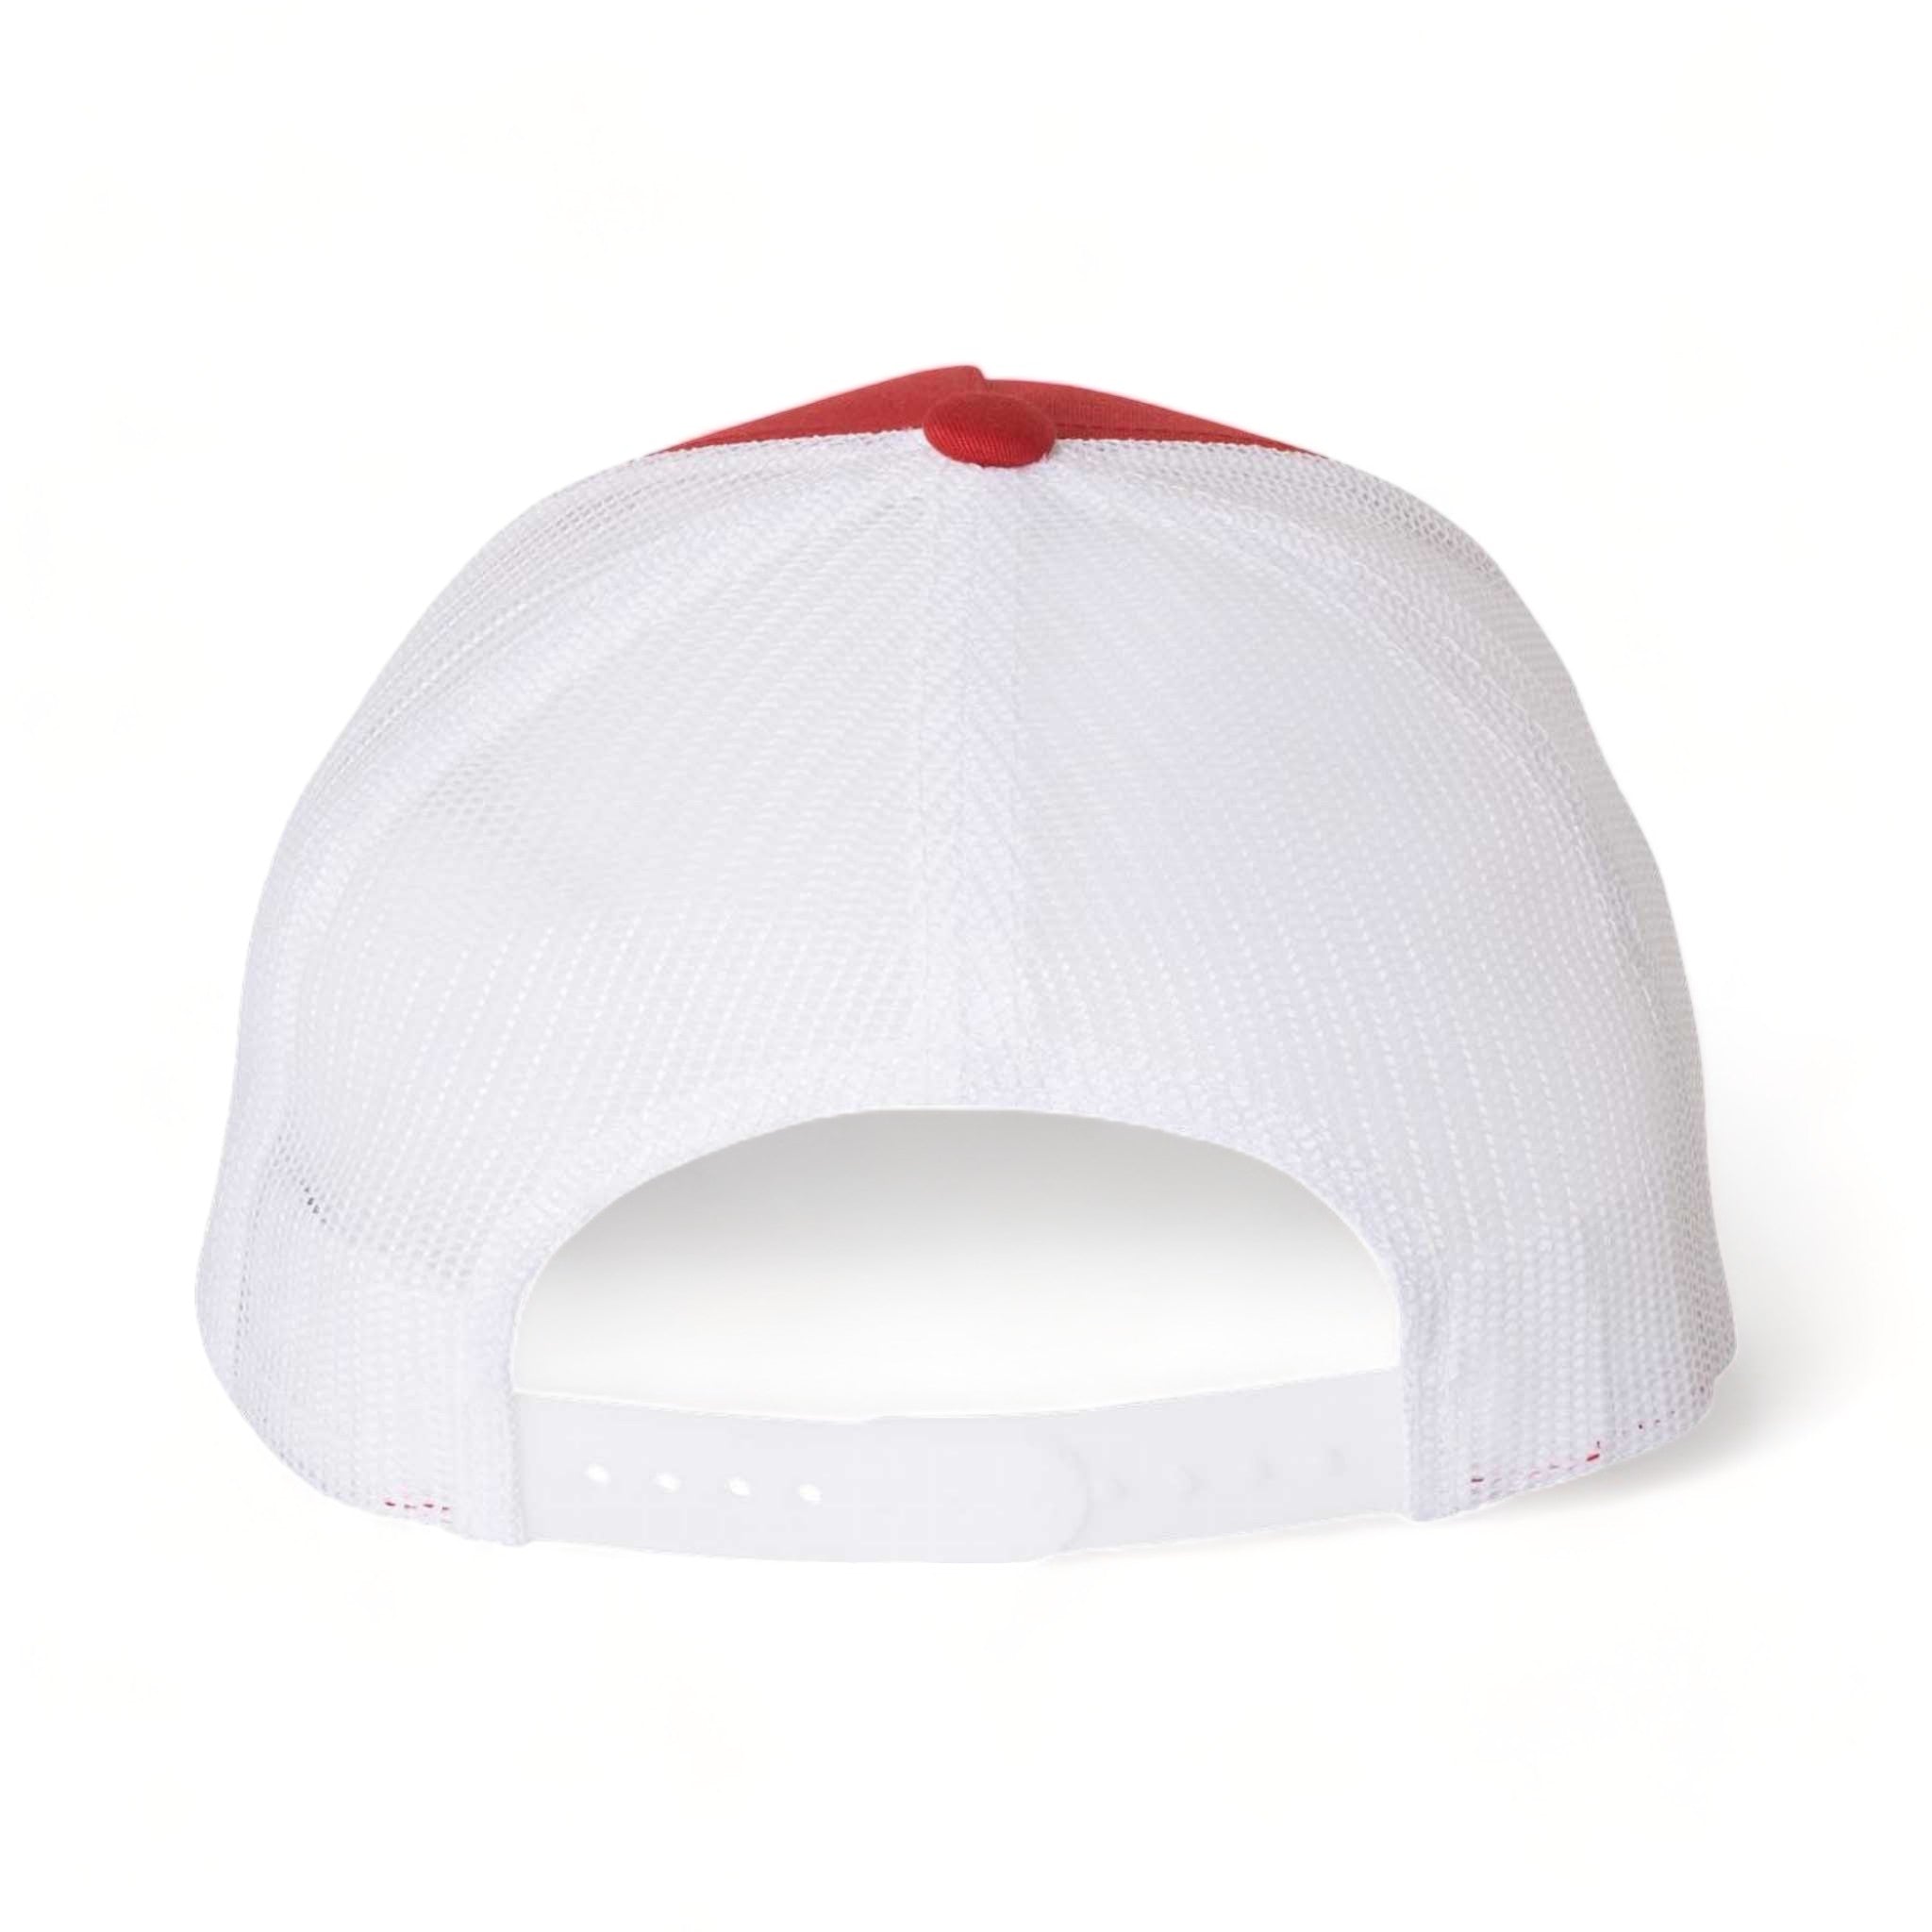 Back view of YP Classics 6506 custom hat in red and white